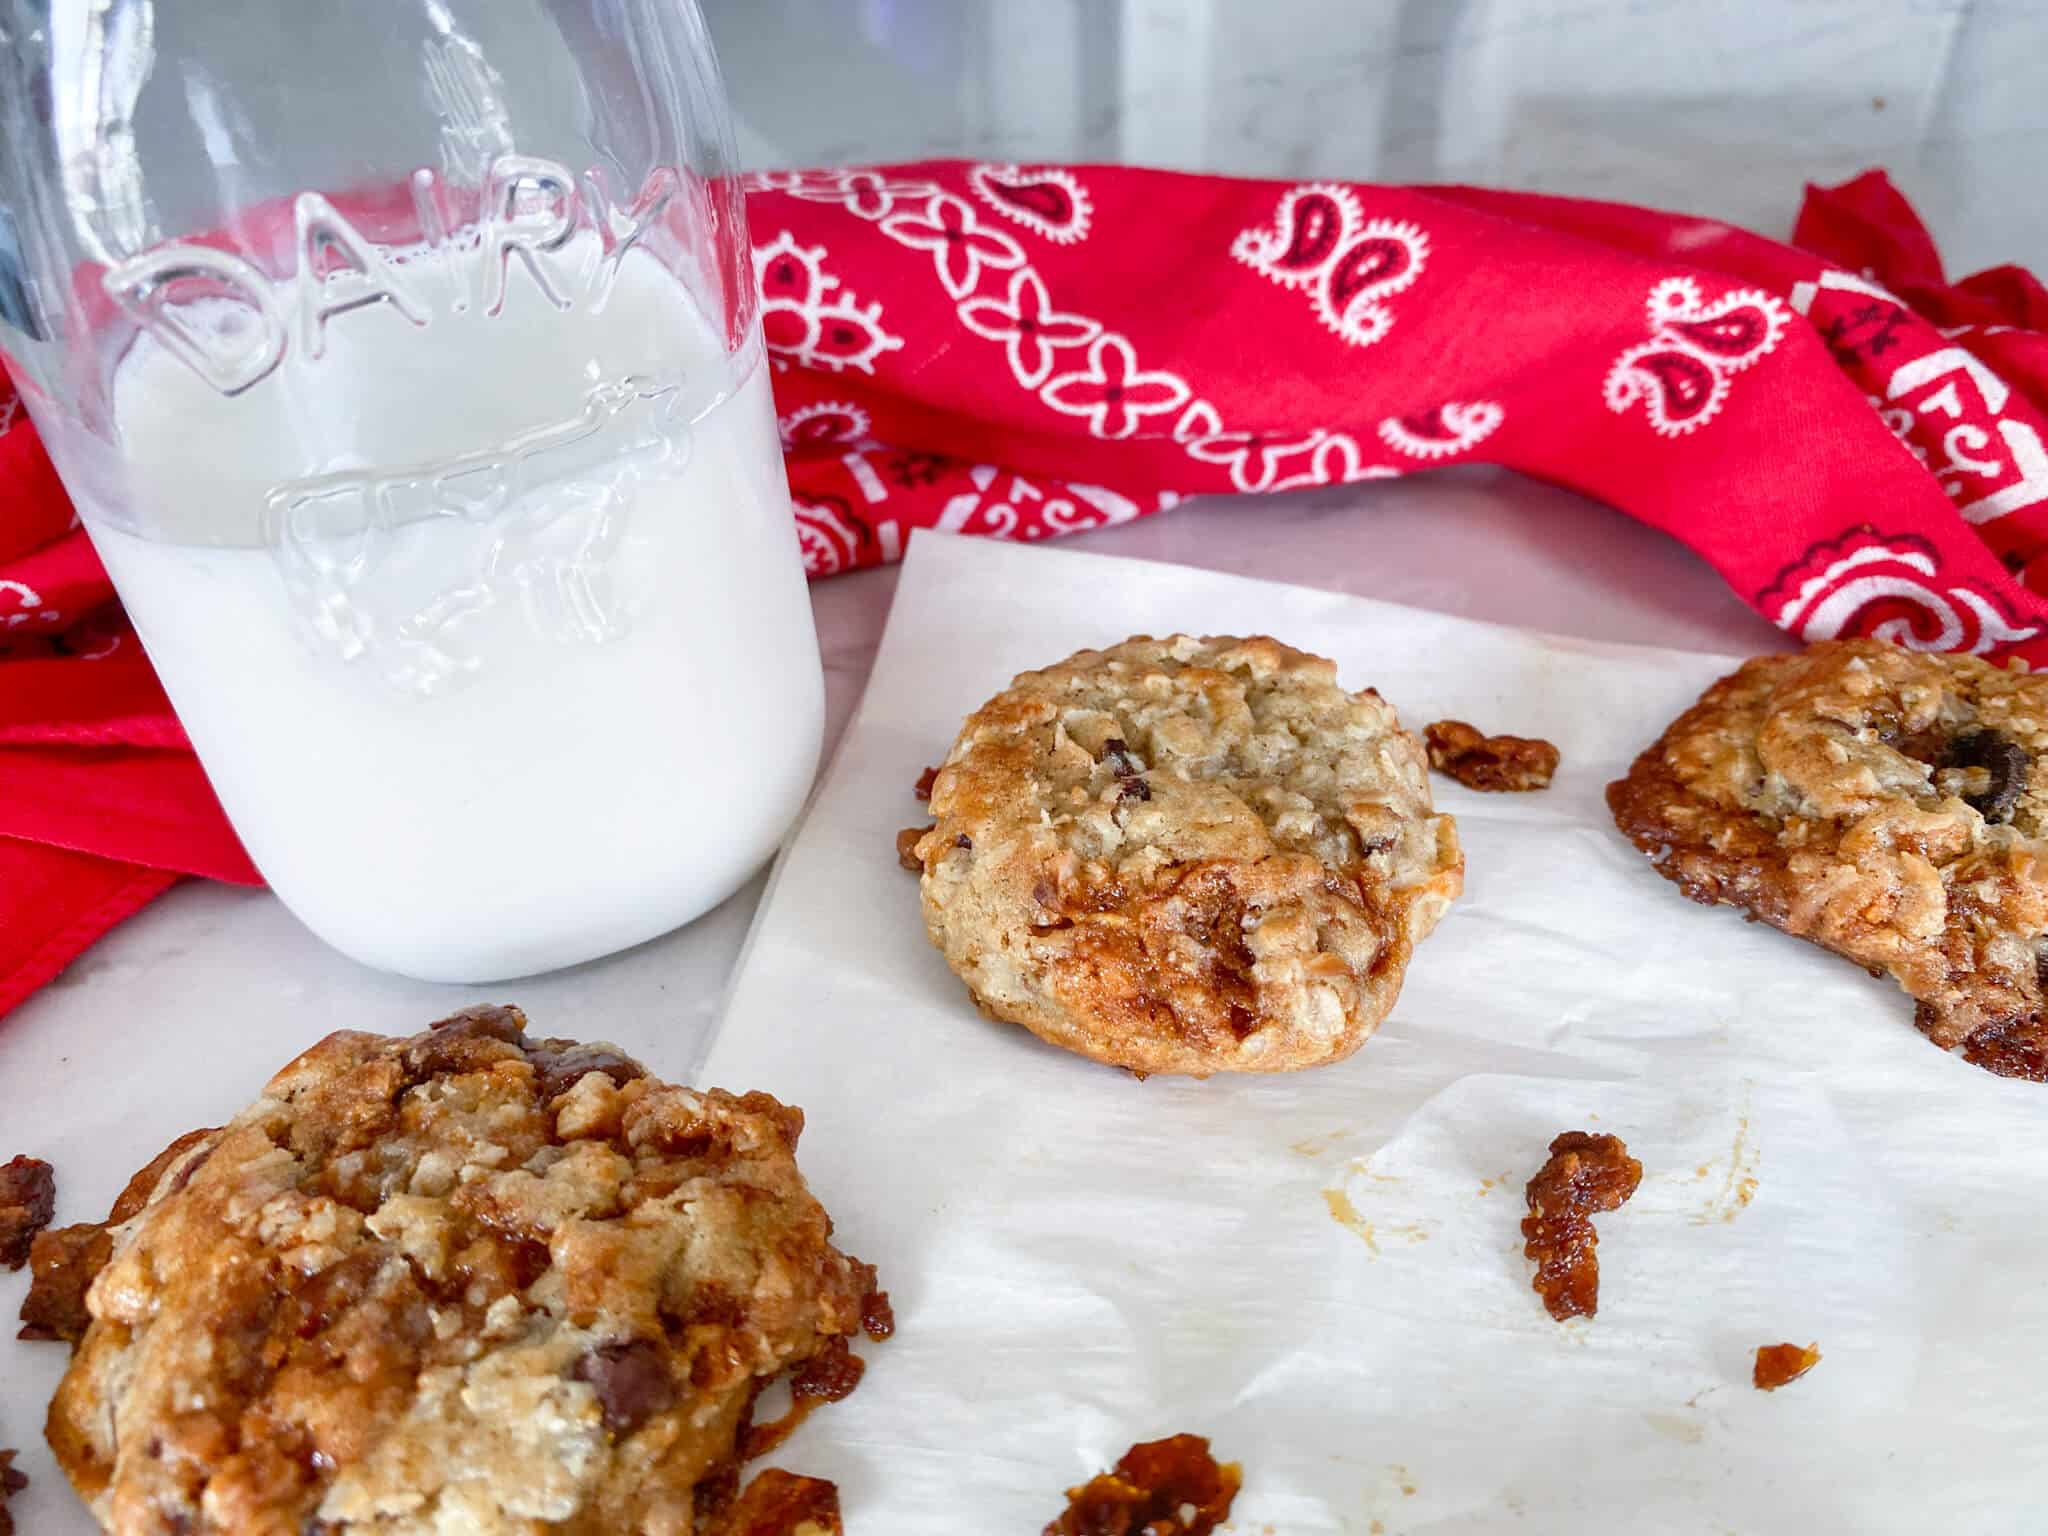 3 bacon chocolate chip cookies with glass of milk and red/white bandana on parchment